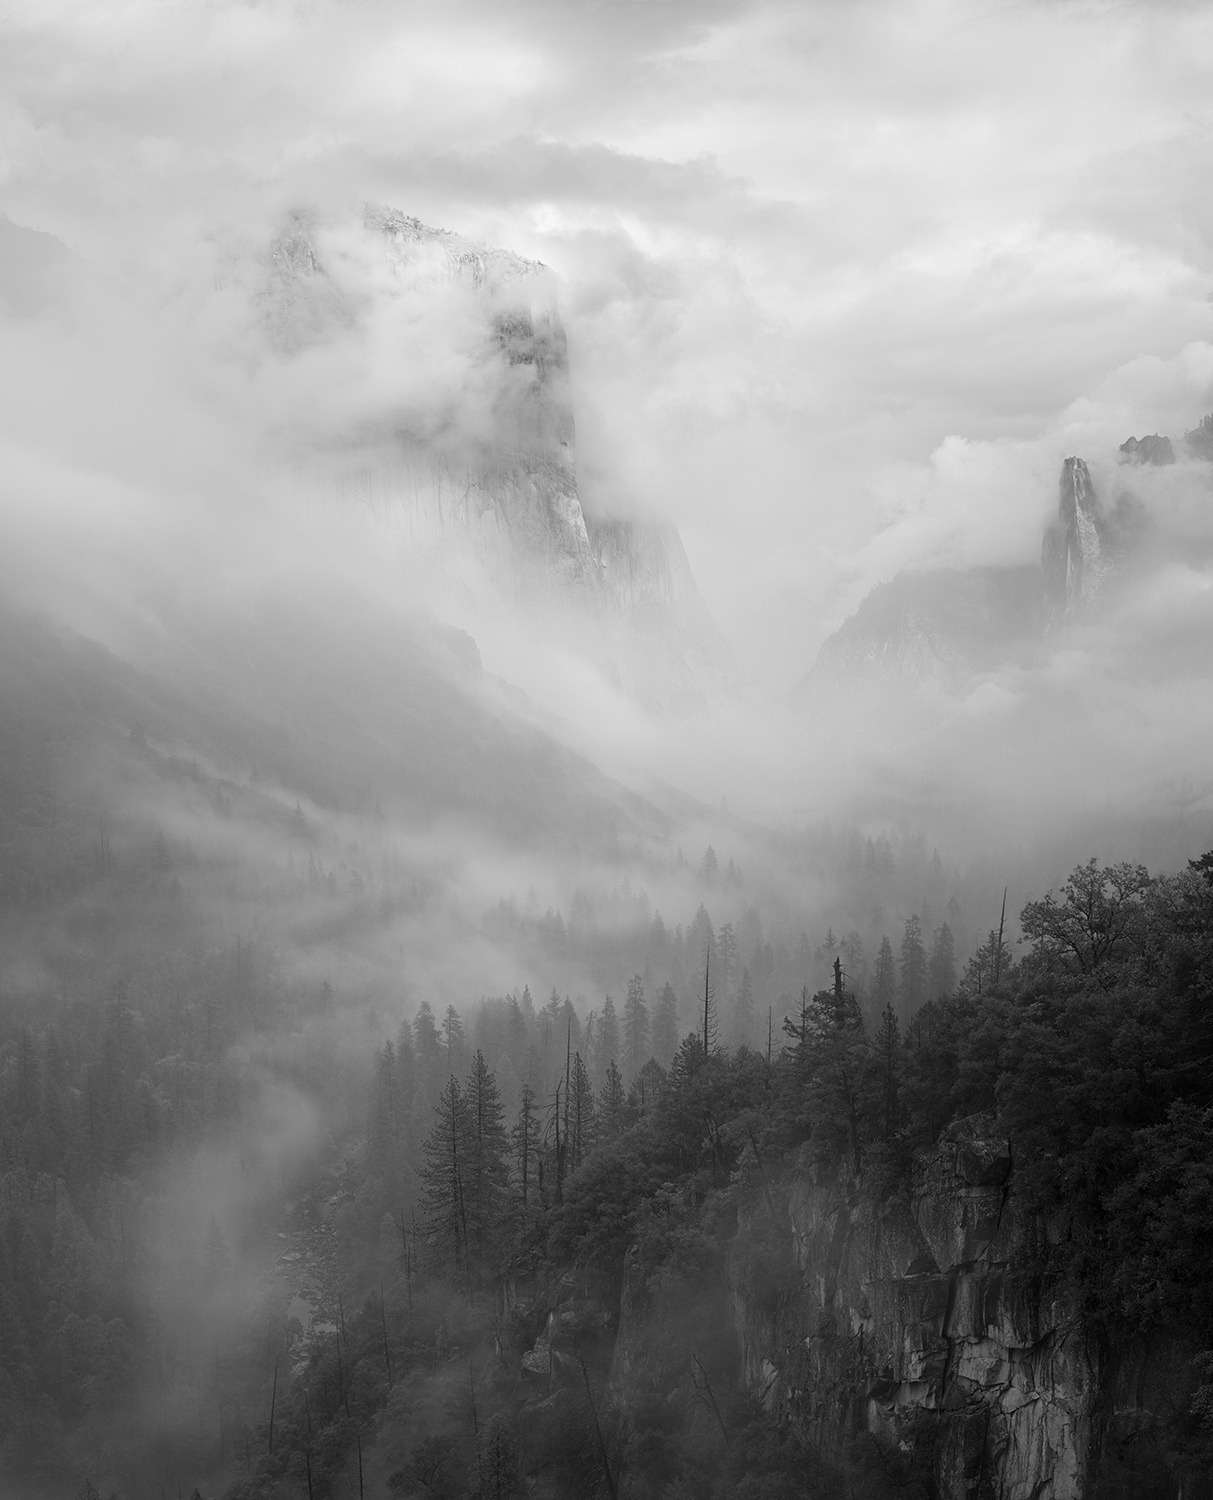 Black and white fine art photograph of a foggy morning in Yosemite National Park from Tunnel view in Yosemite Valley.